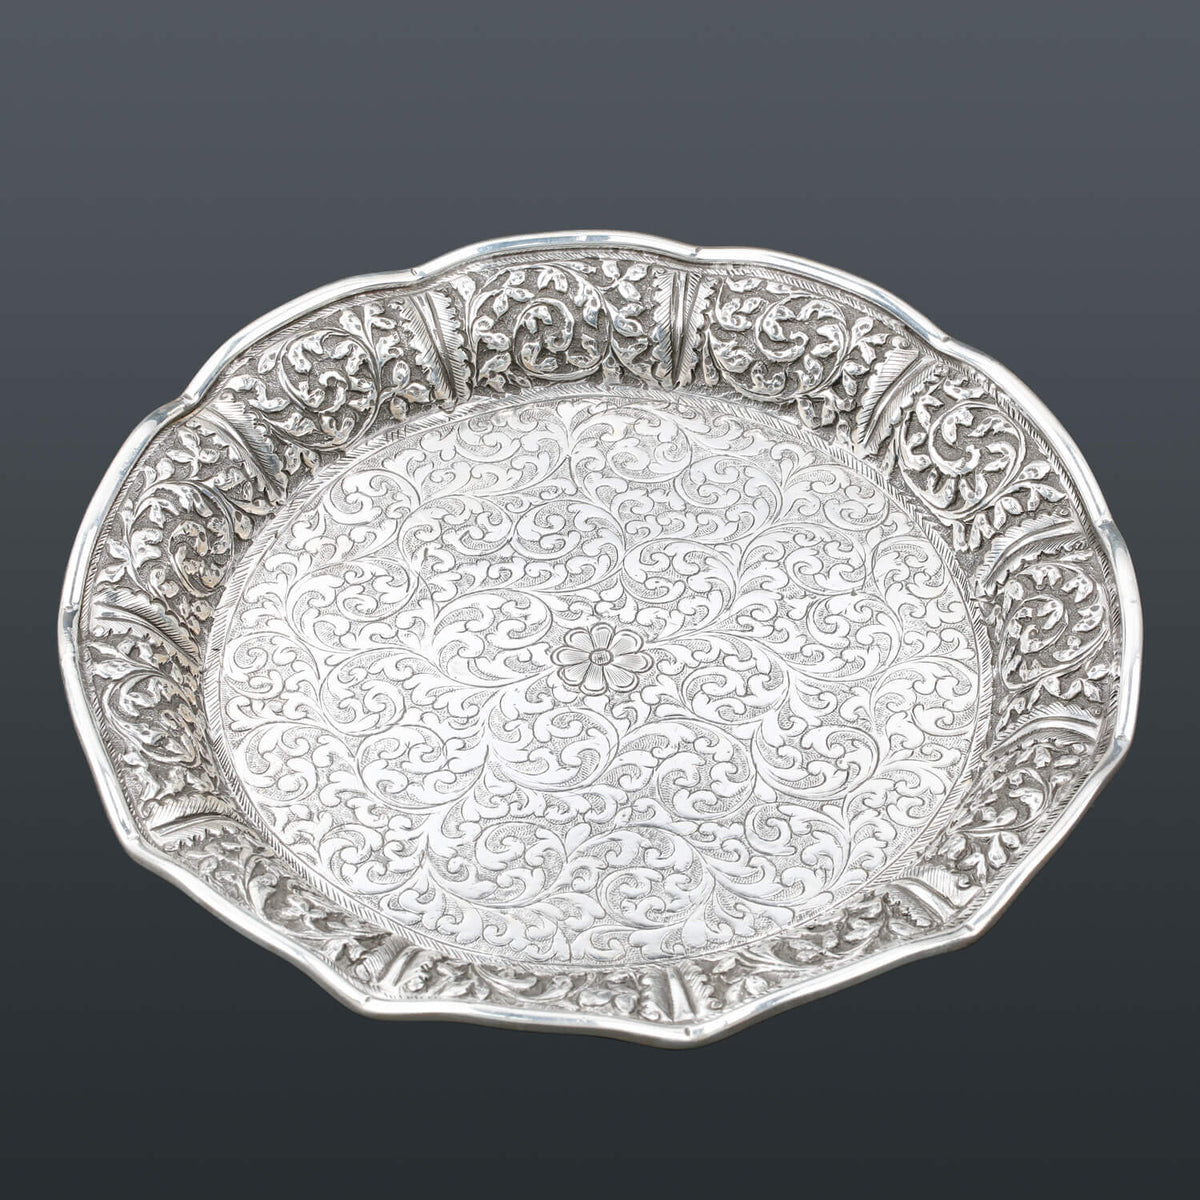 silver plates, sterling silver plates, floral plates, decor, decoration, tableware, handmade, handcrafted, Festival, Showpiece, Gifts, Gifting, Large plate, small plate, silver tray, large tray, small tray, Hand-etched Scrollwork Plate with Plain Rim